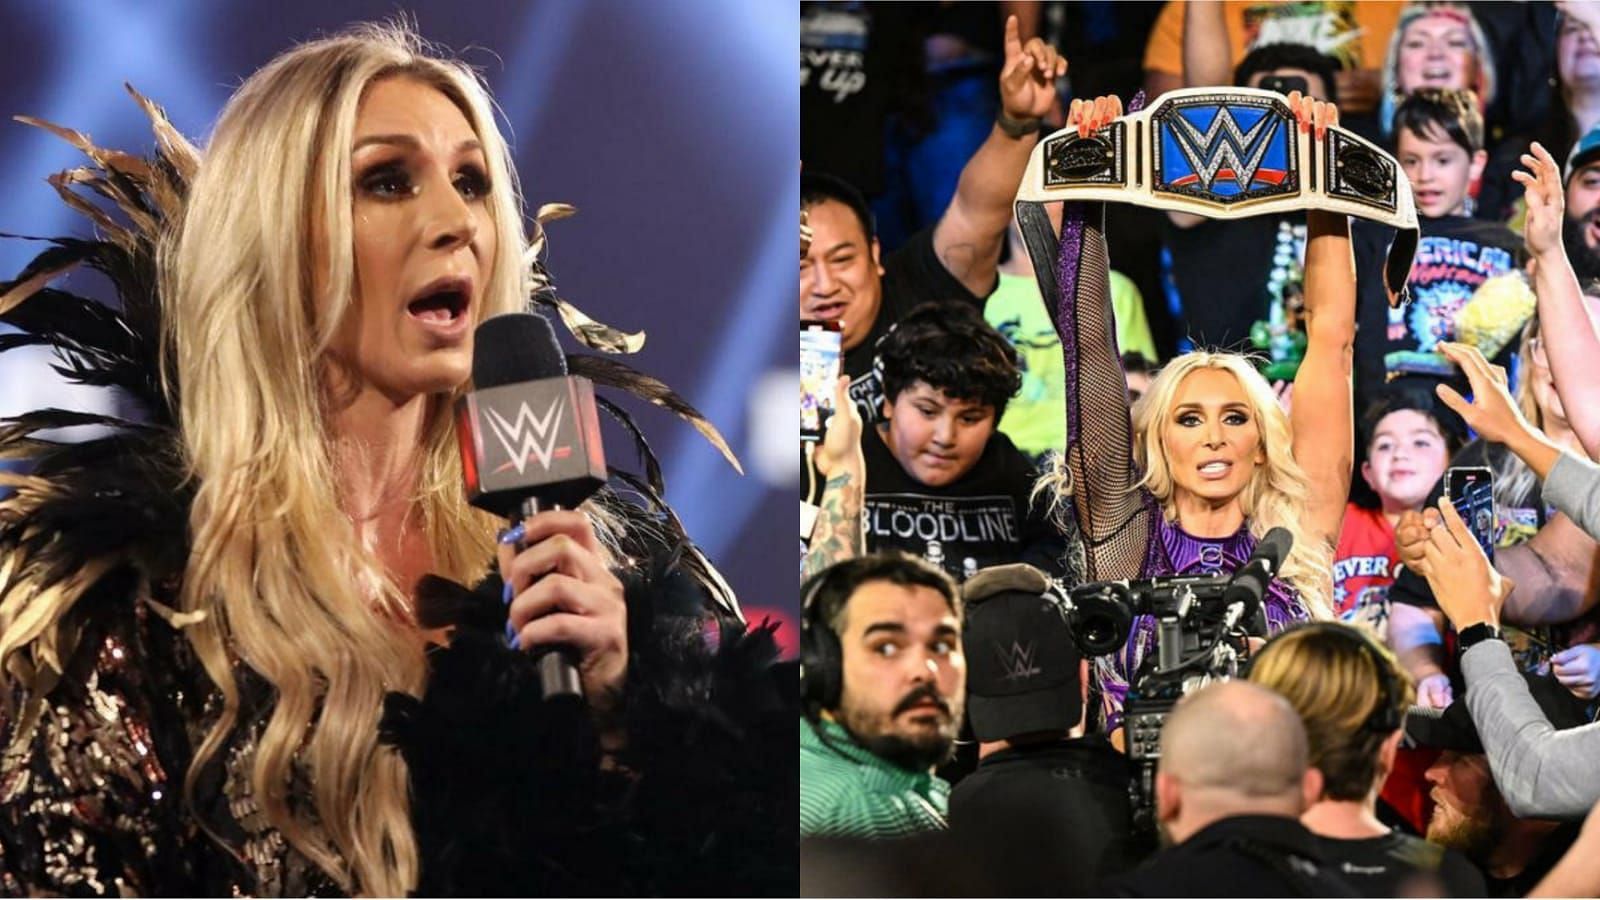 Charlotte Flair returned to in-ring action on SmackDown!